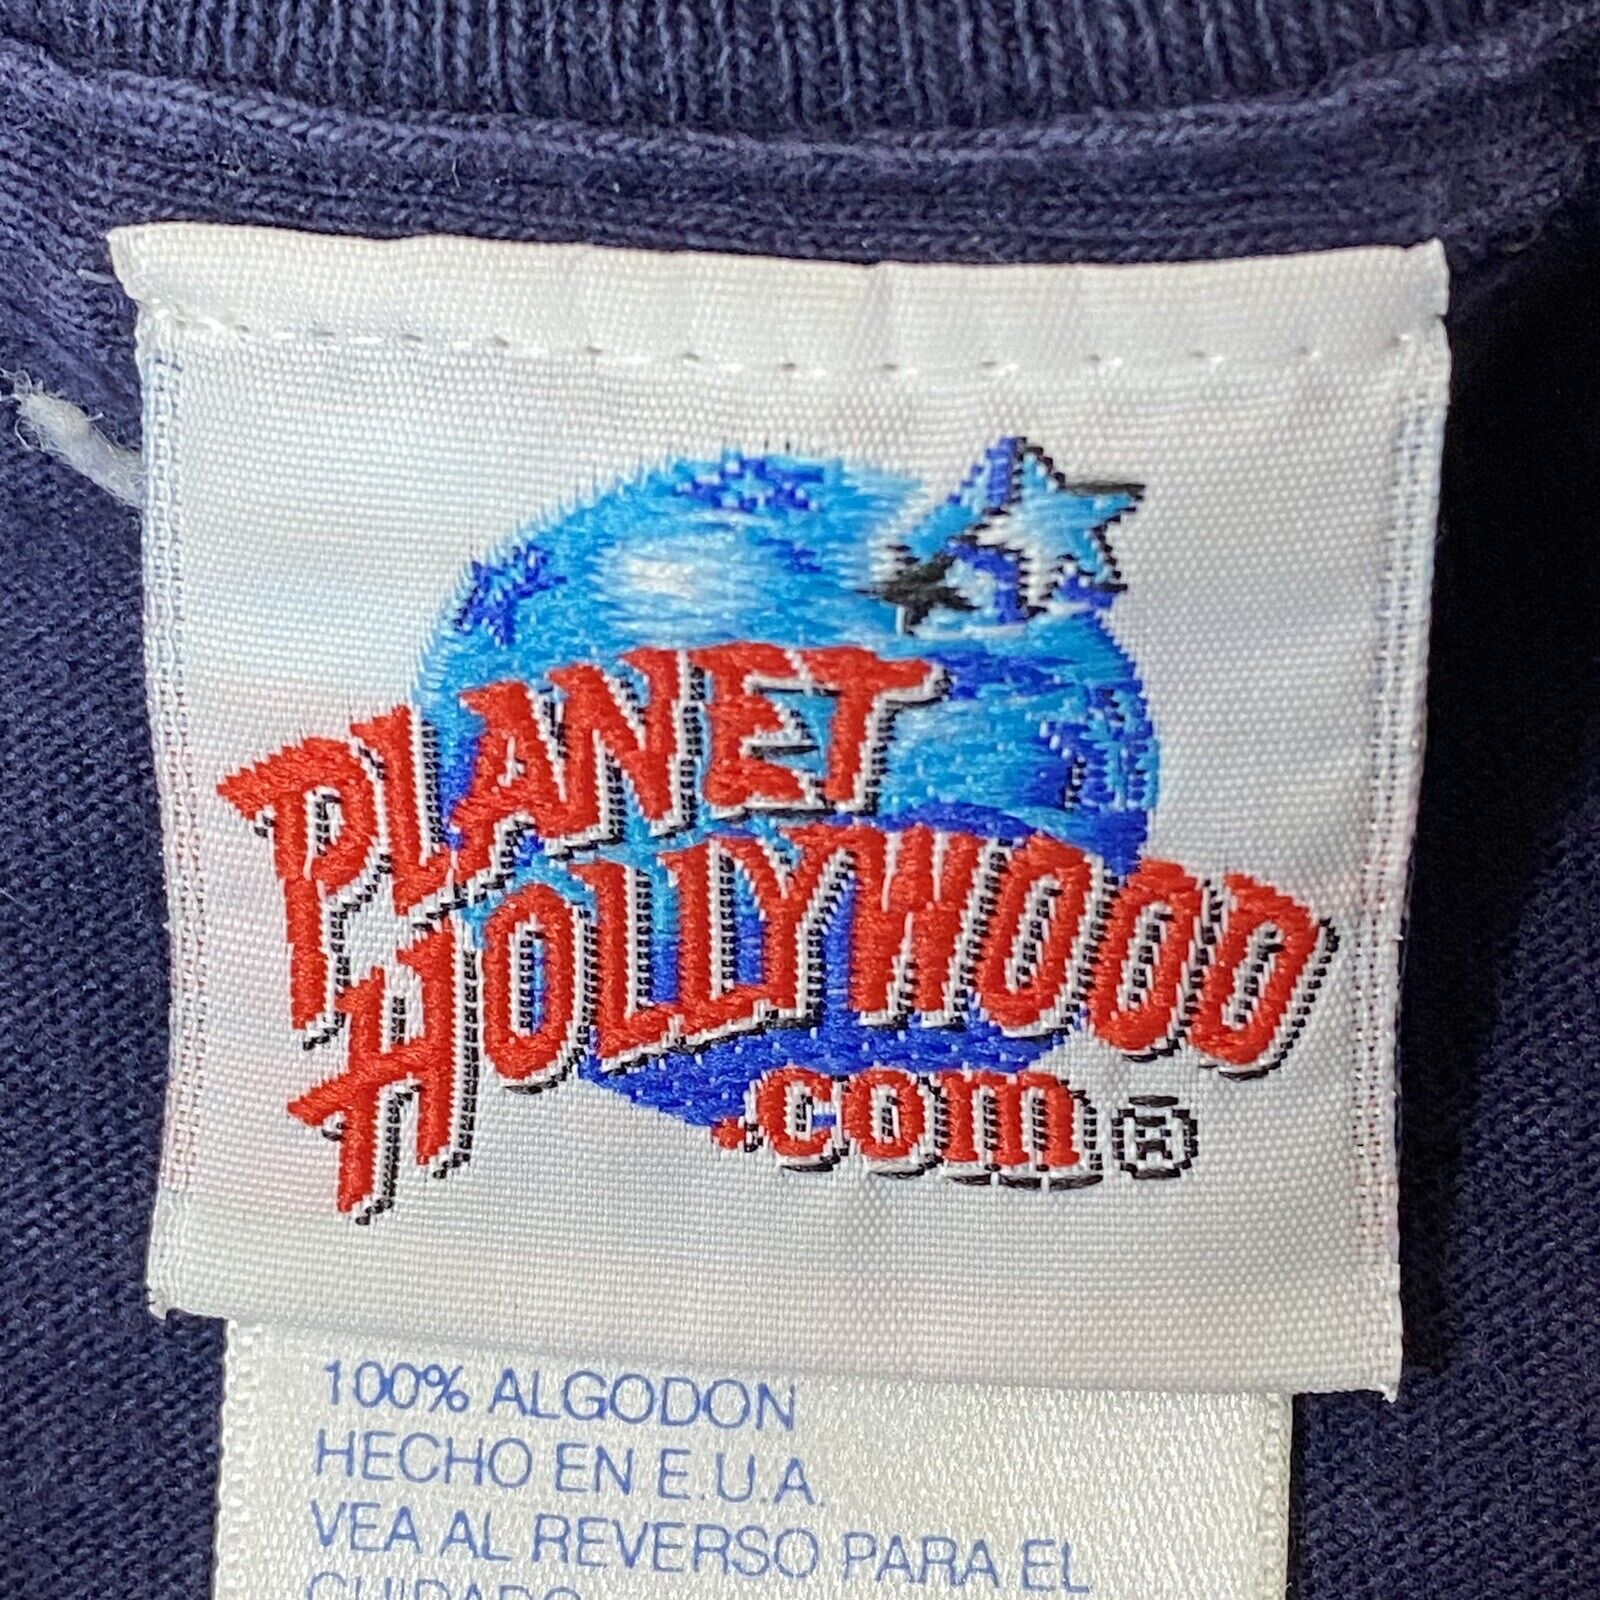 Vintage 90’s T Shirt Honolulu Hawaii Planet Hollywood Size Large L RARE